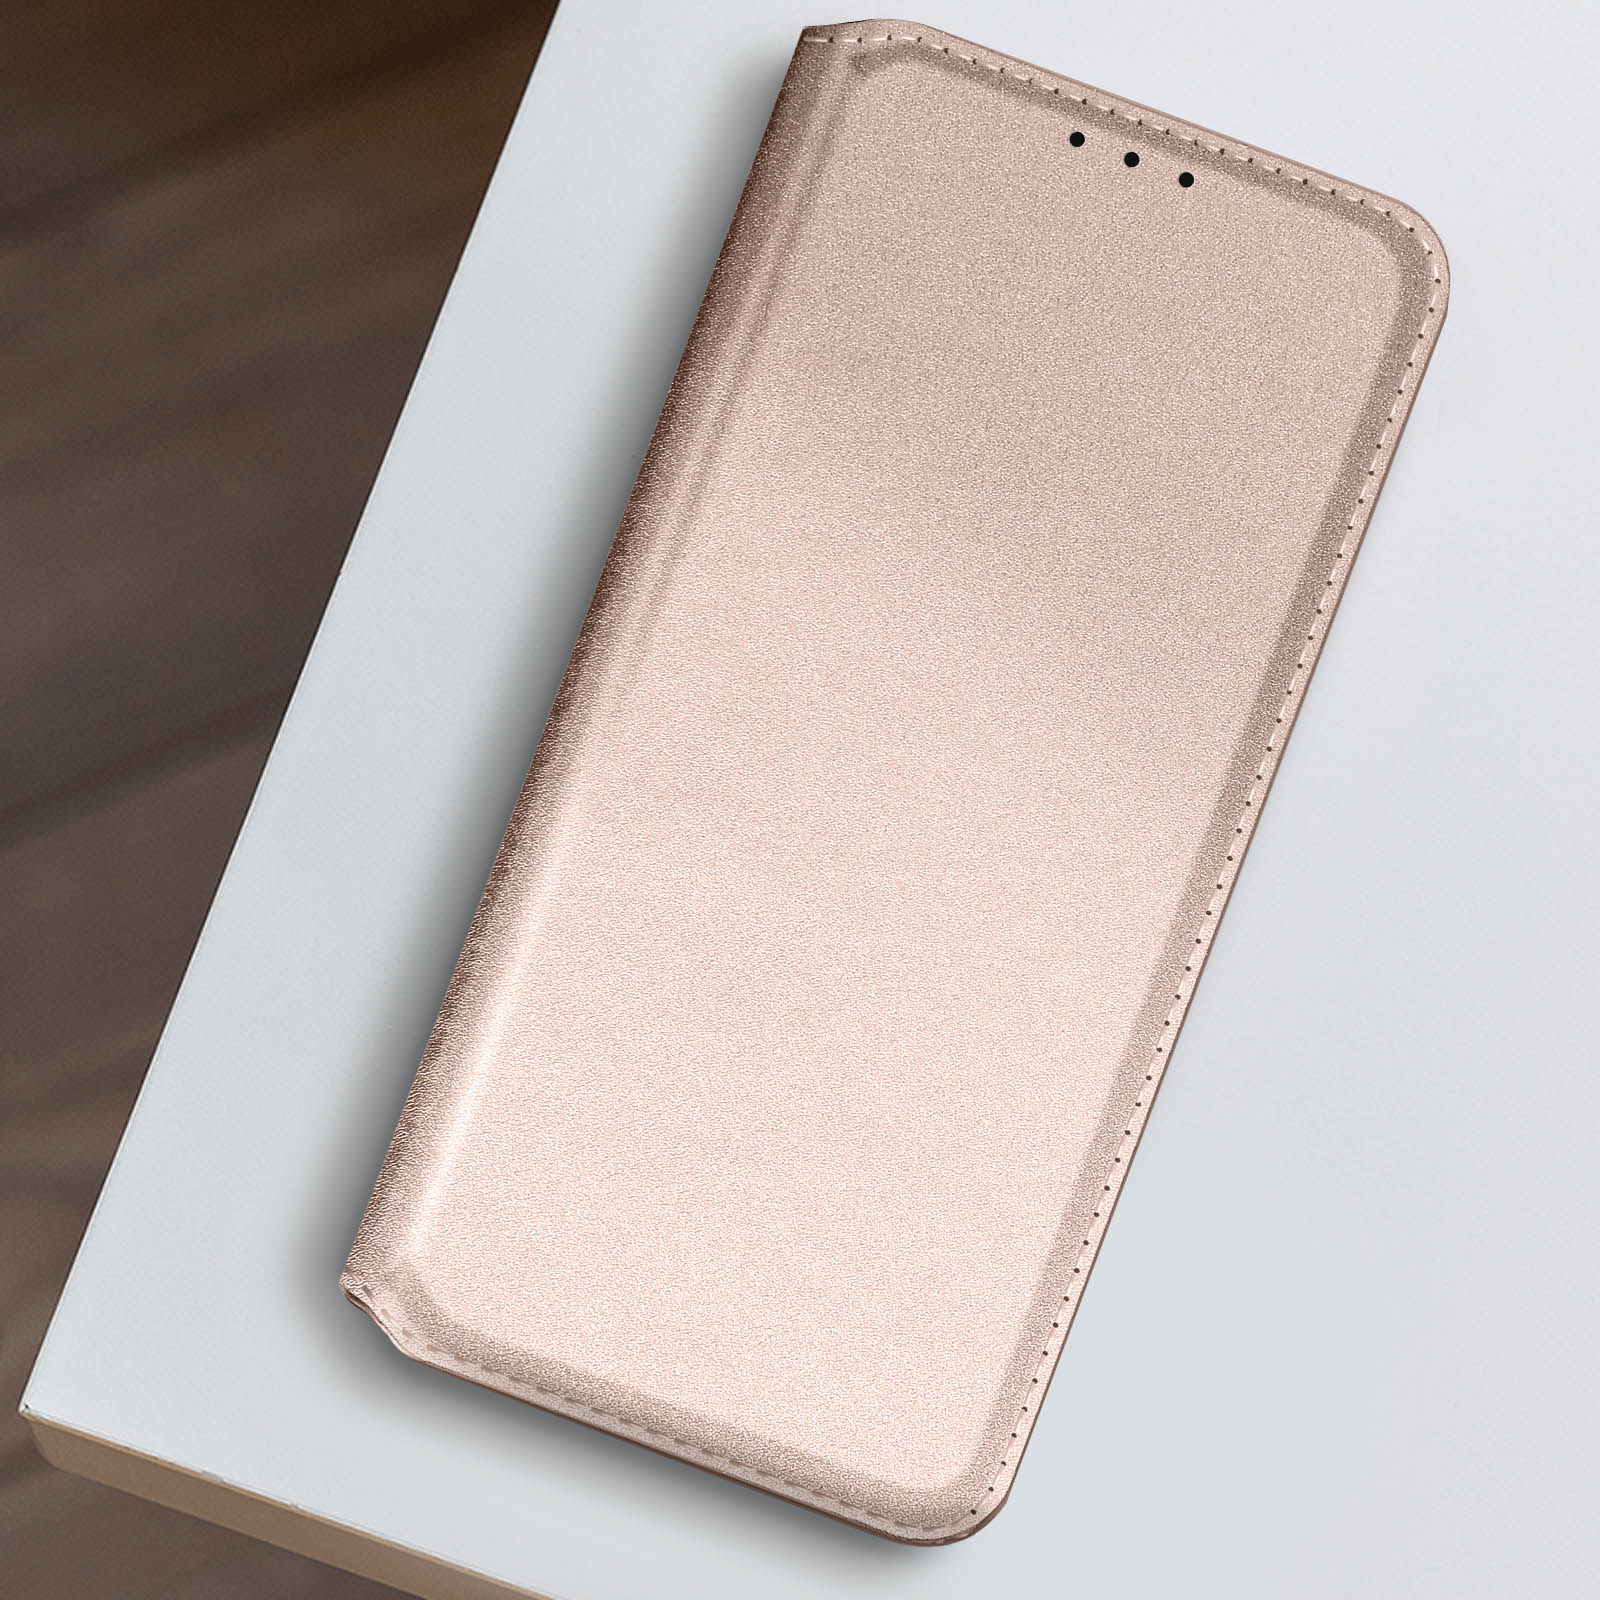 mit Series, Classic Bookcover, Edition, Backcover Rosegold Wiko, Wiko AVIZAR Magnetklappe Y81,